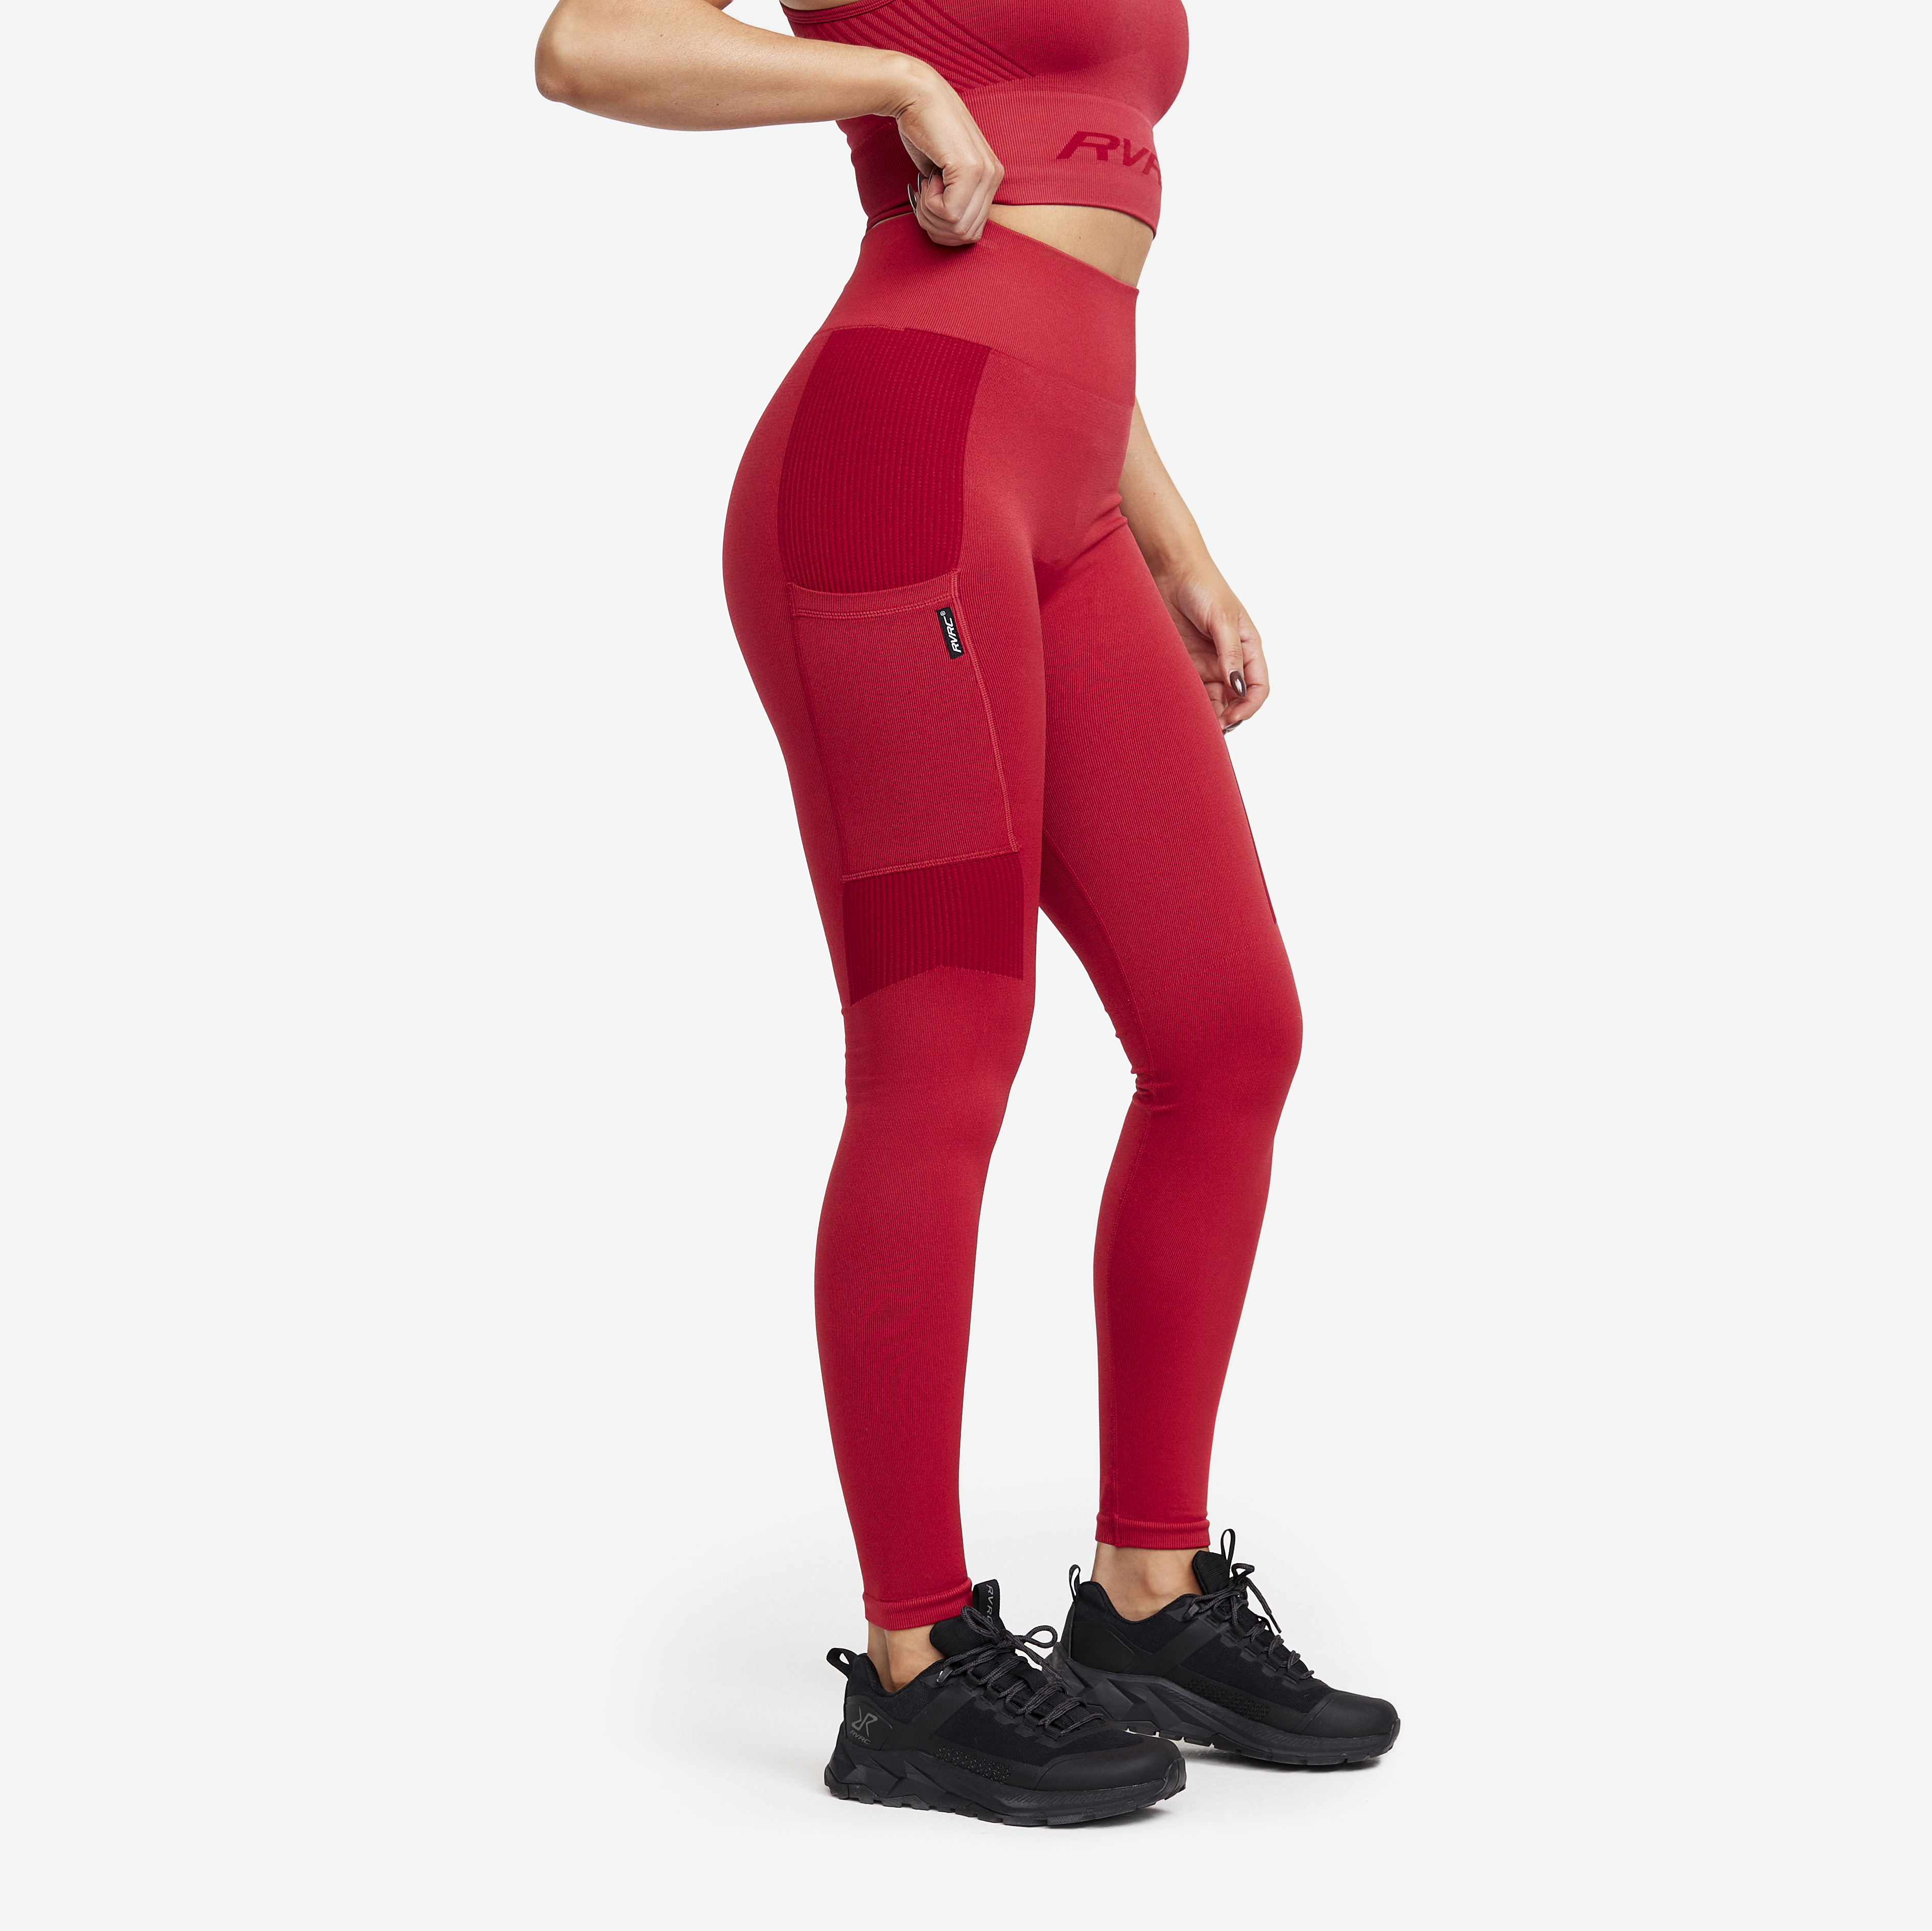 Descent Seamless Tights – Dam – Holly Berry Storlek:S-M – Outdoor Tights